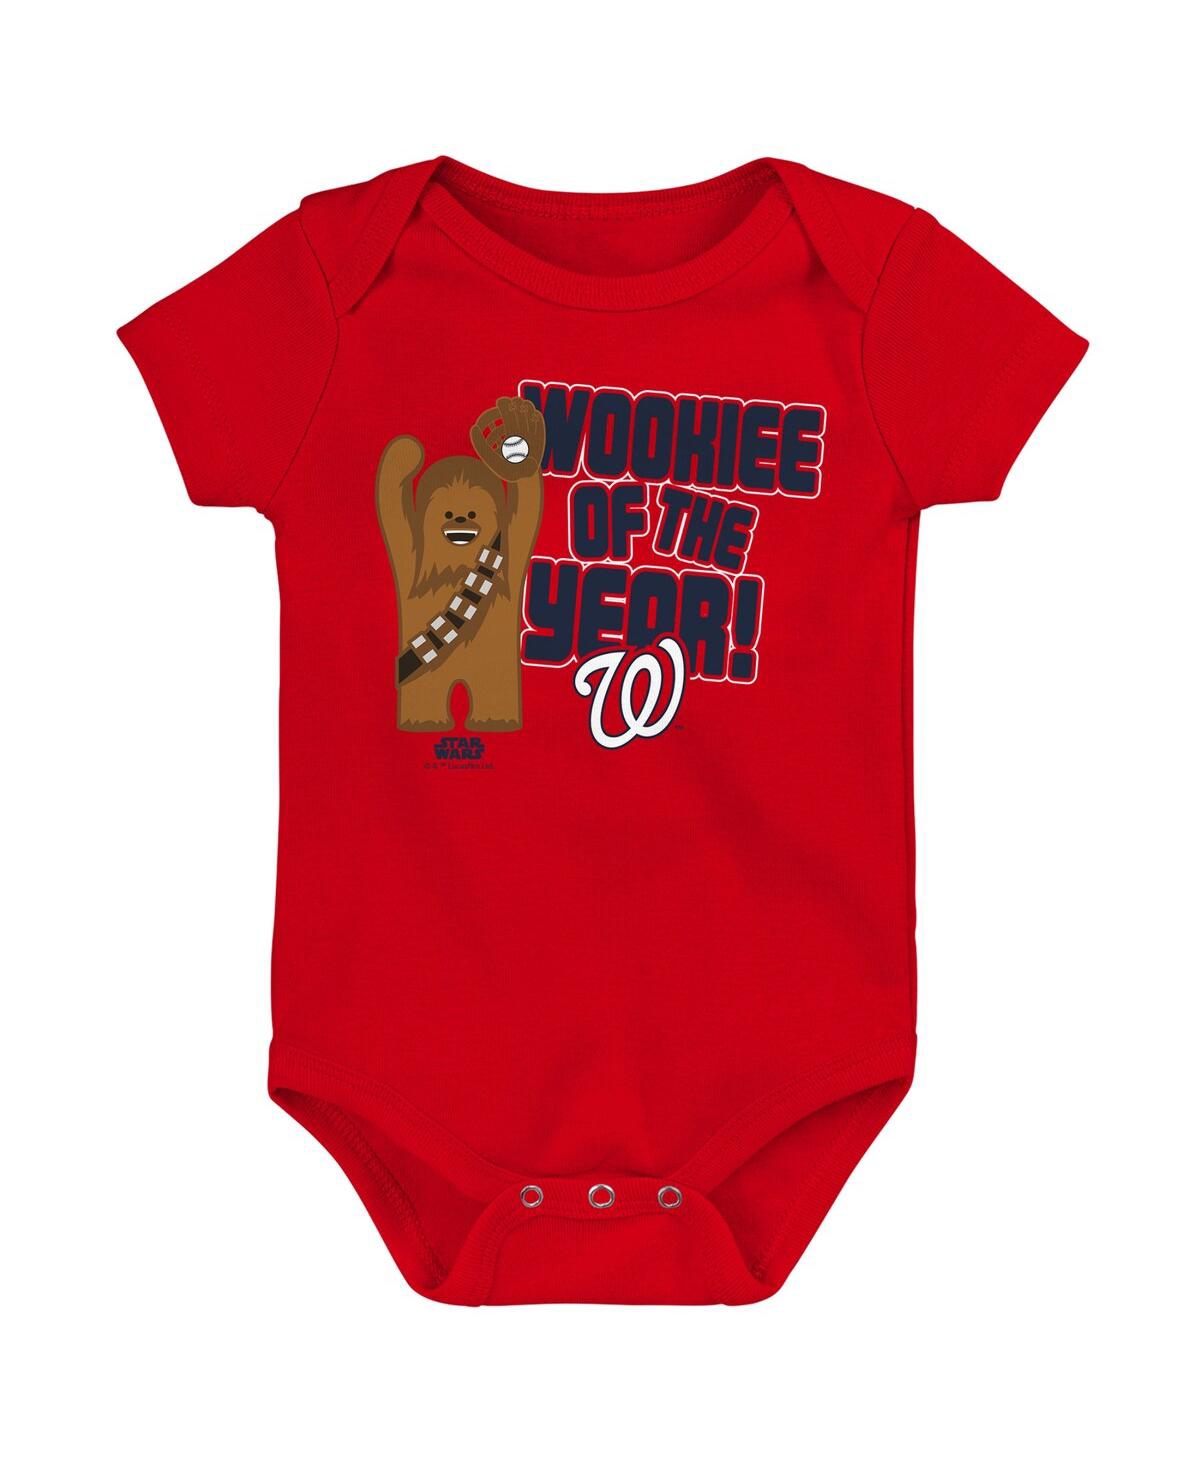 Outerstuff Babies' Newborn And Infant Boys And Girls Red Washington Nationals Star Wars Wookie Of The Year Bodysuit